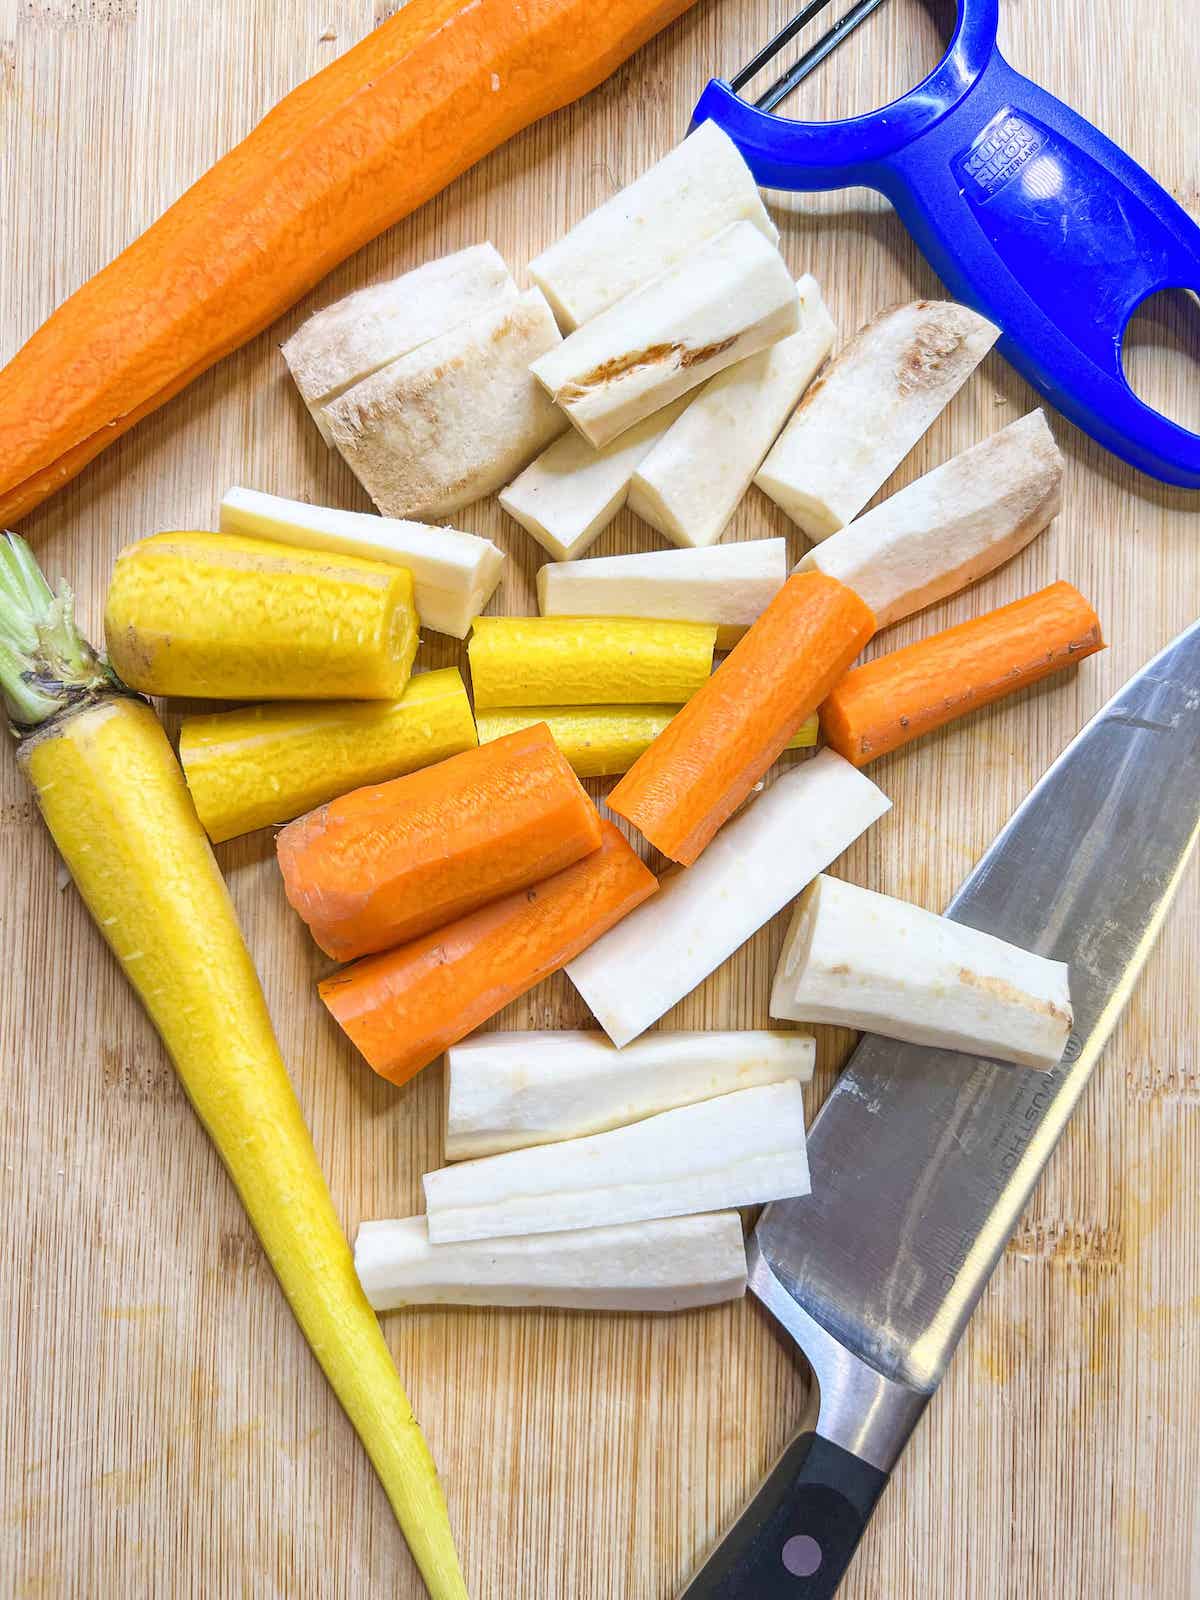 Cut carrots and parsnips on a wood cutting board with a knife and a blue vegetable peeler.